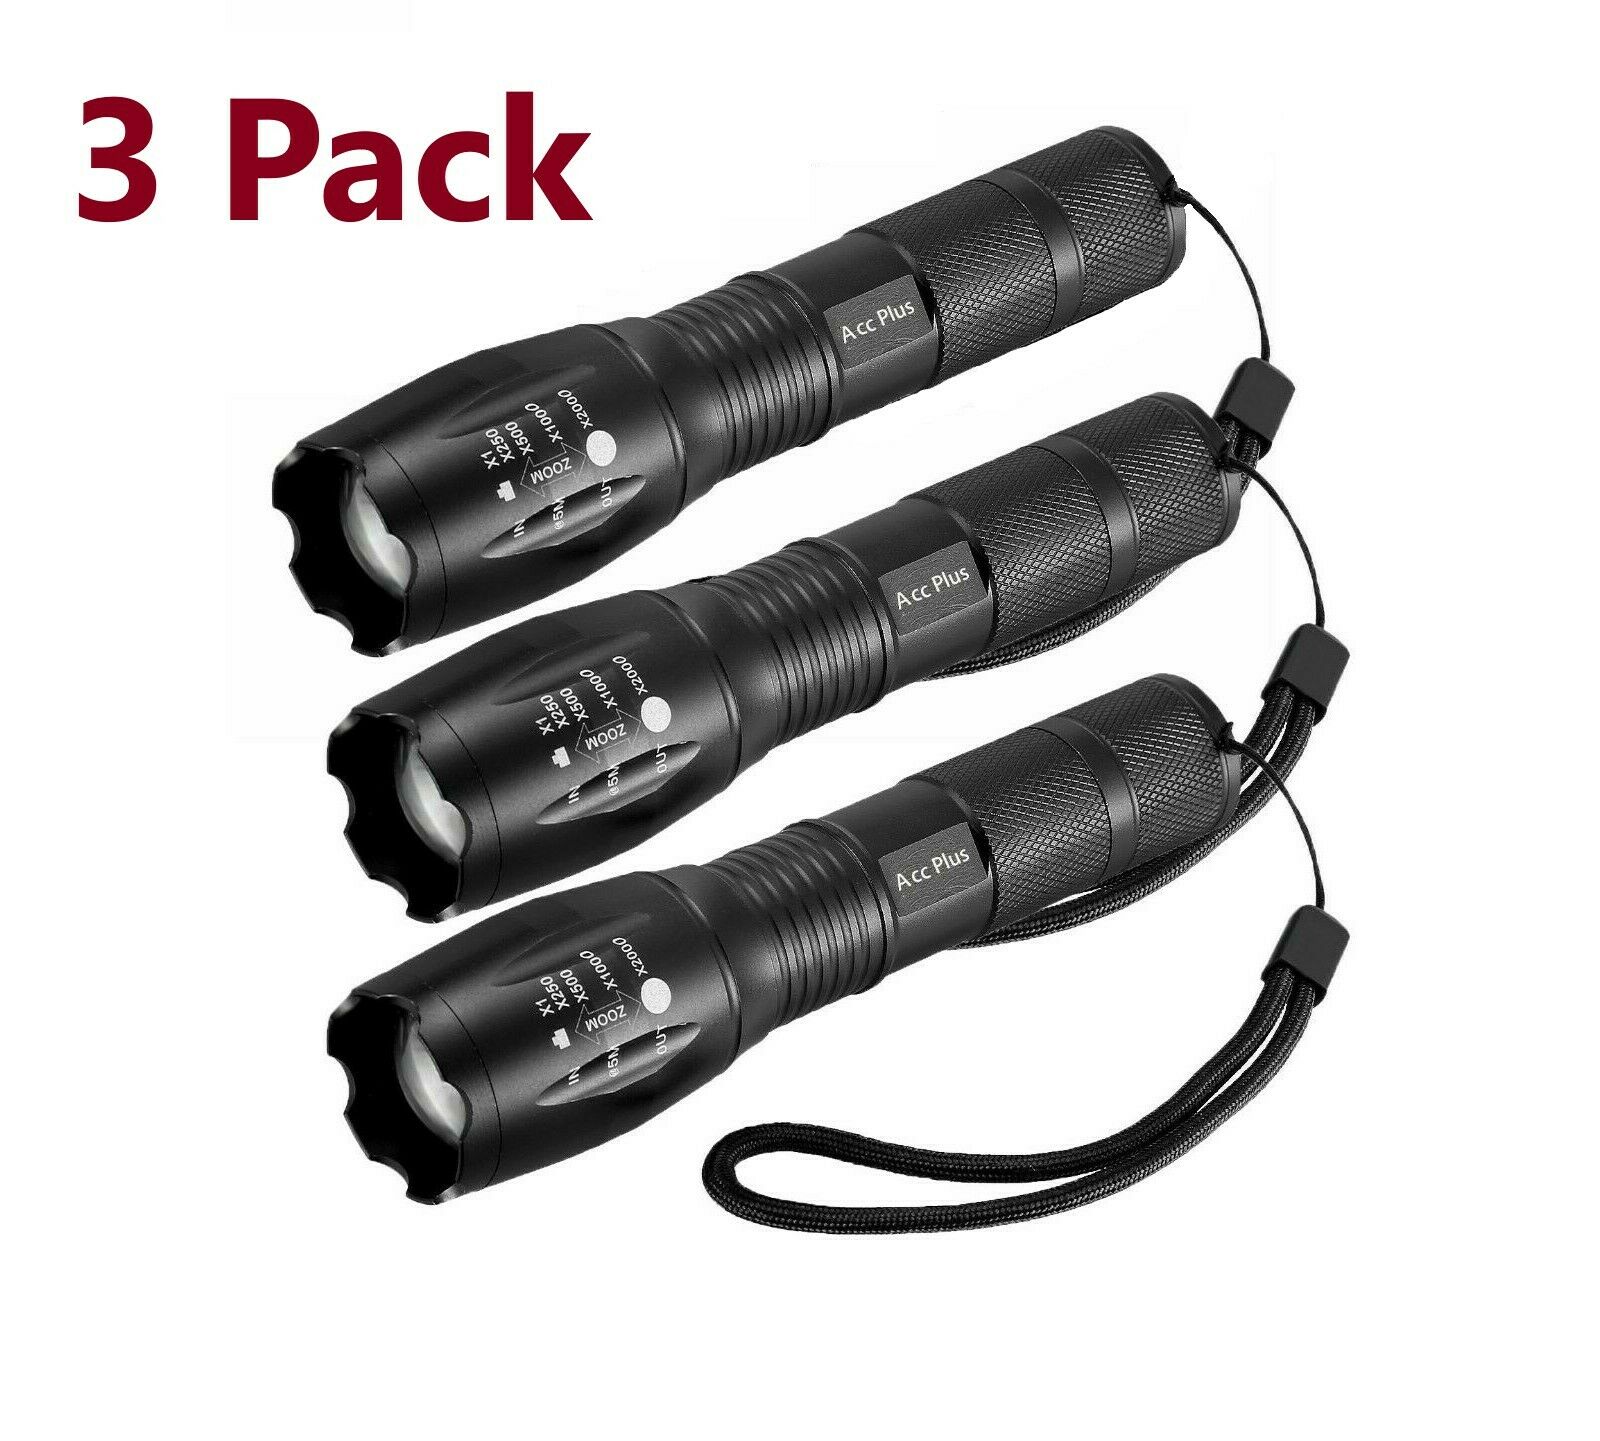 3 X Tactical 18650 Flashlight Ultrafire T6 High Powered 5modes Zoomable Aluminum